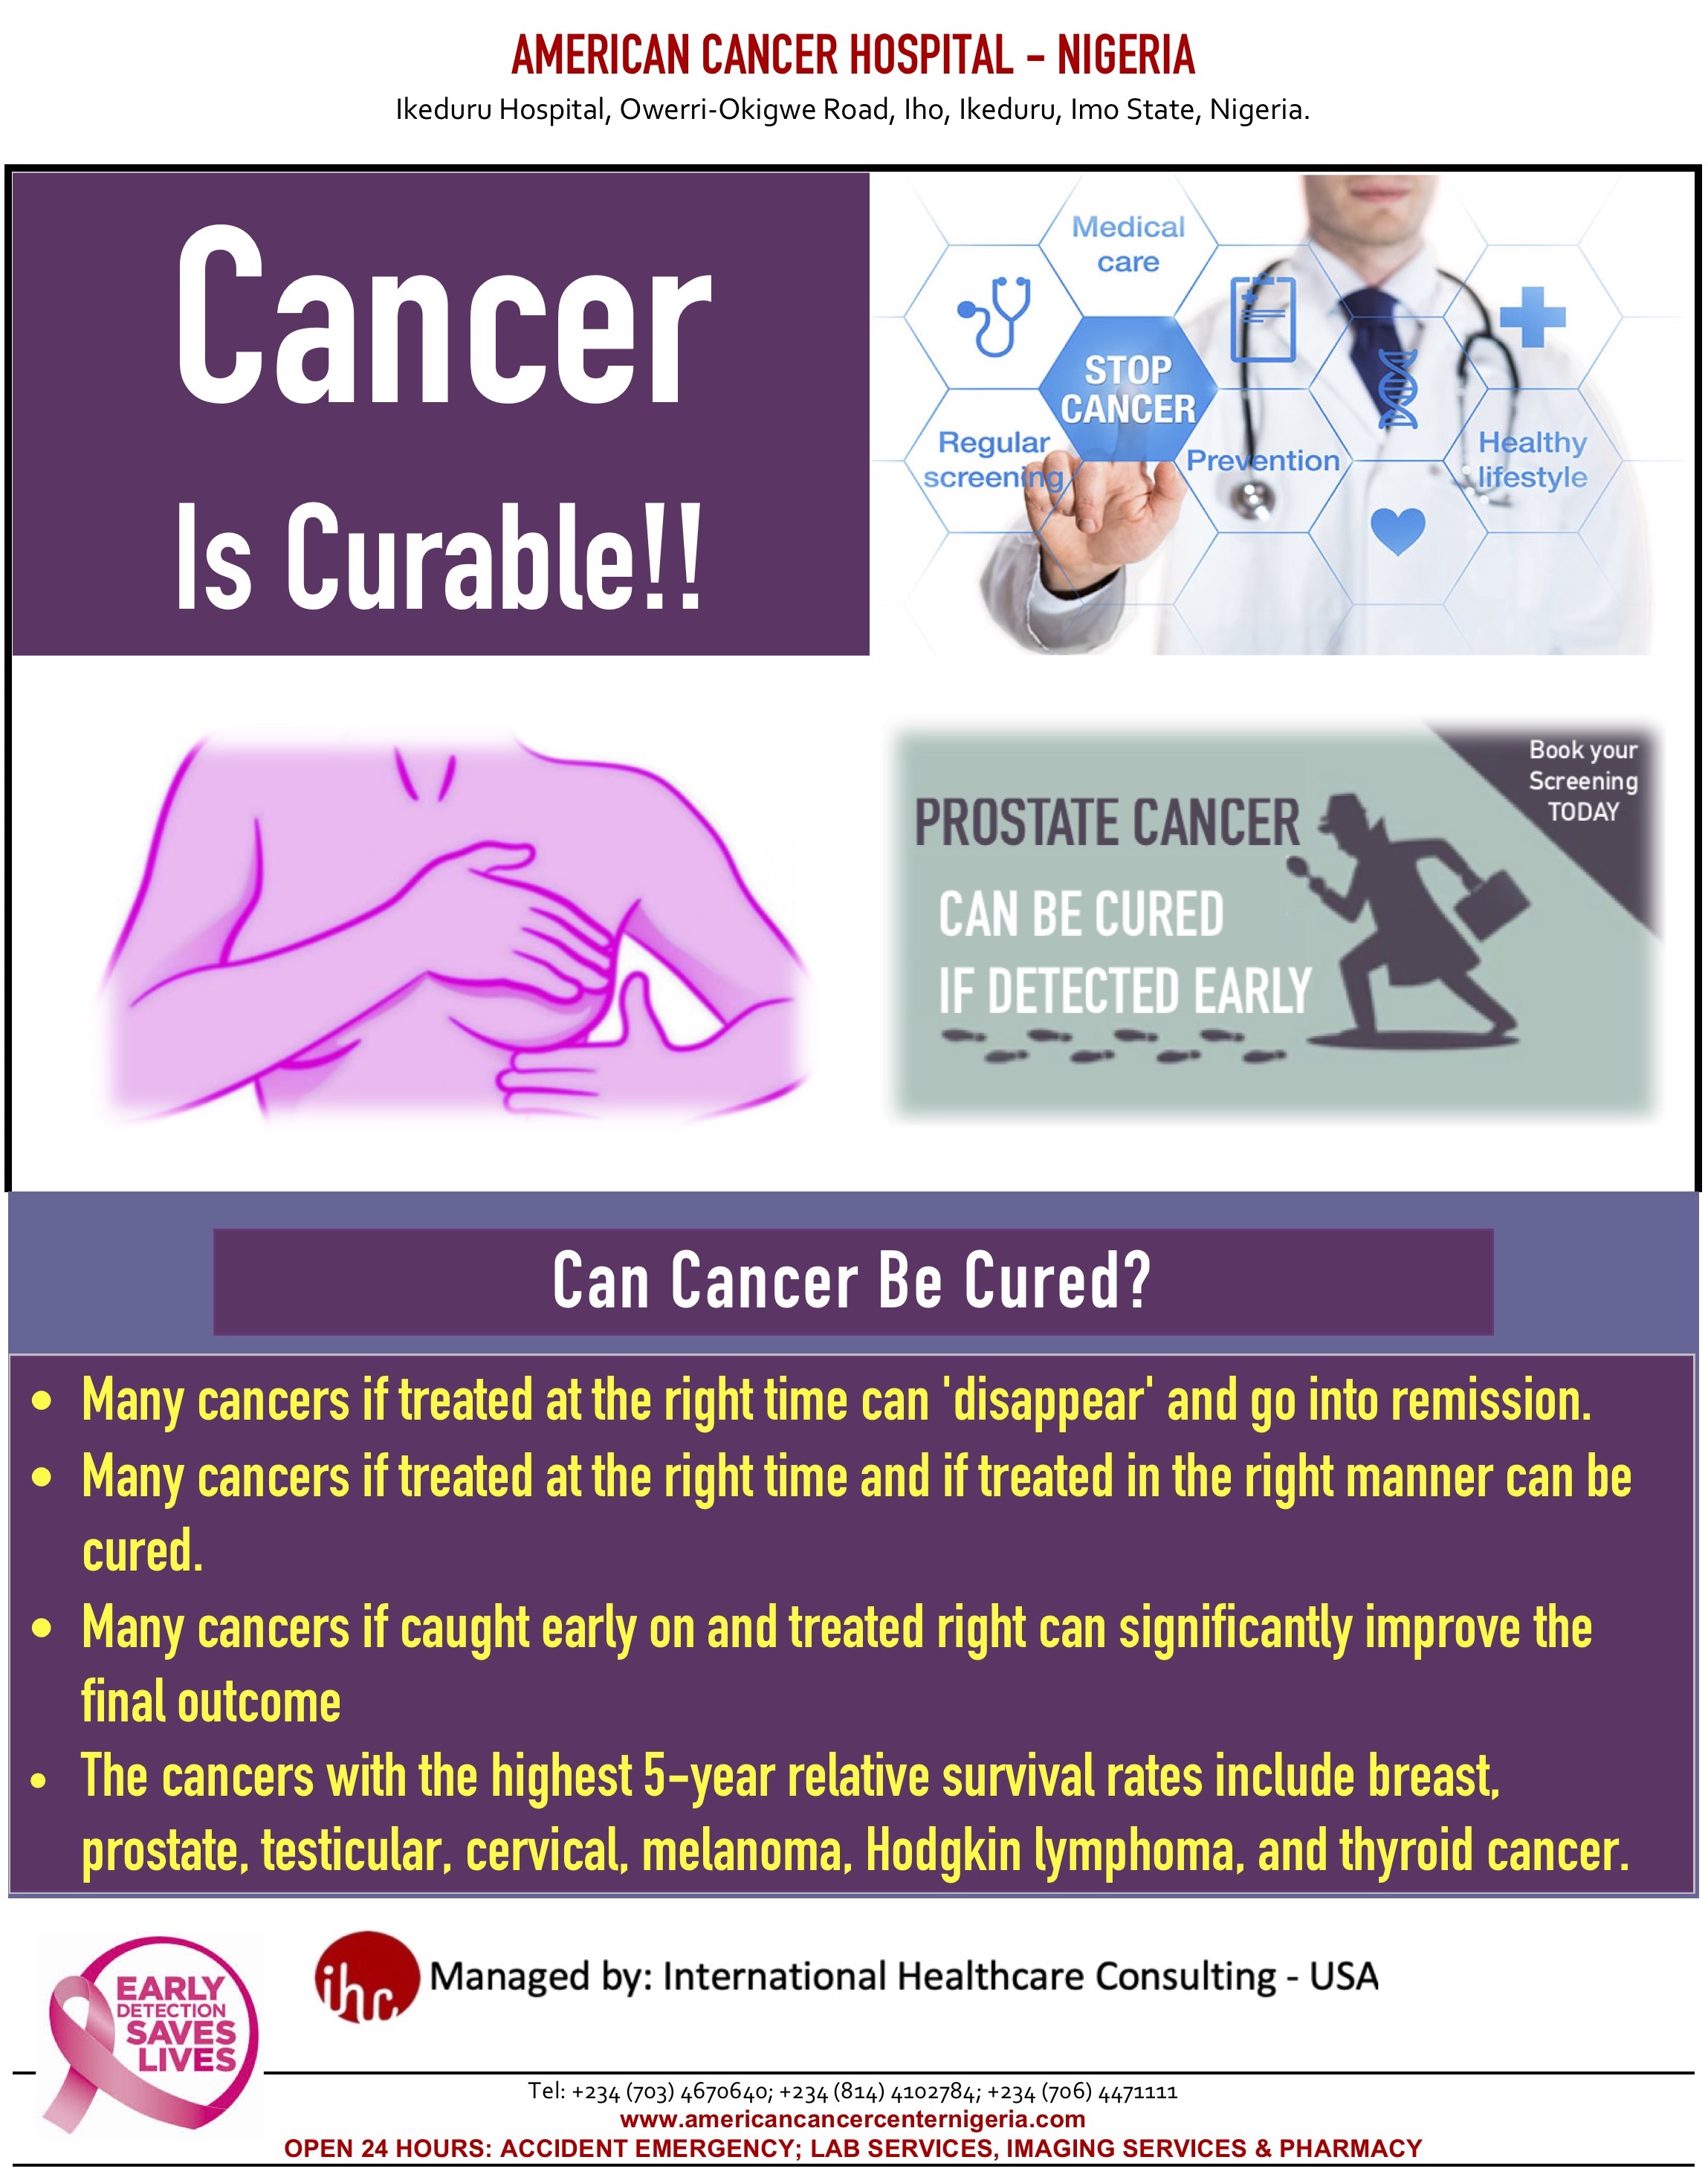 CANCER IS CURABLE